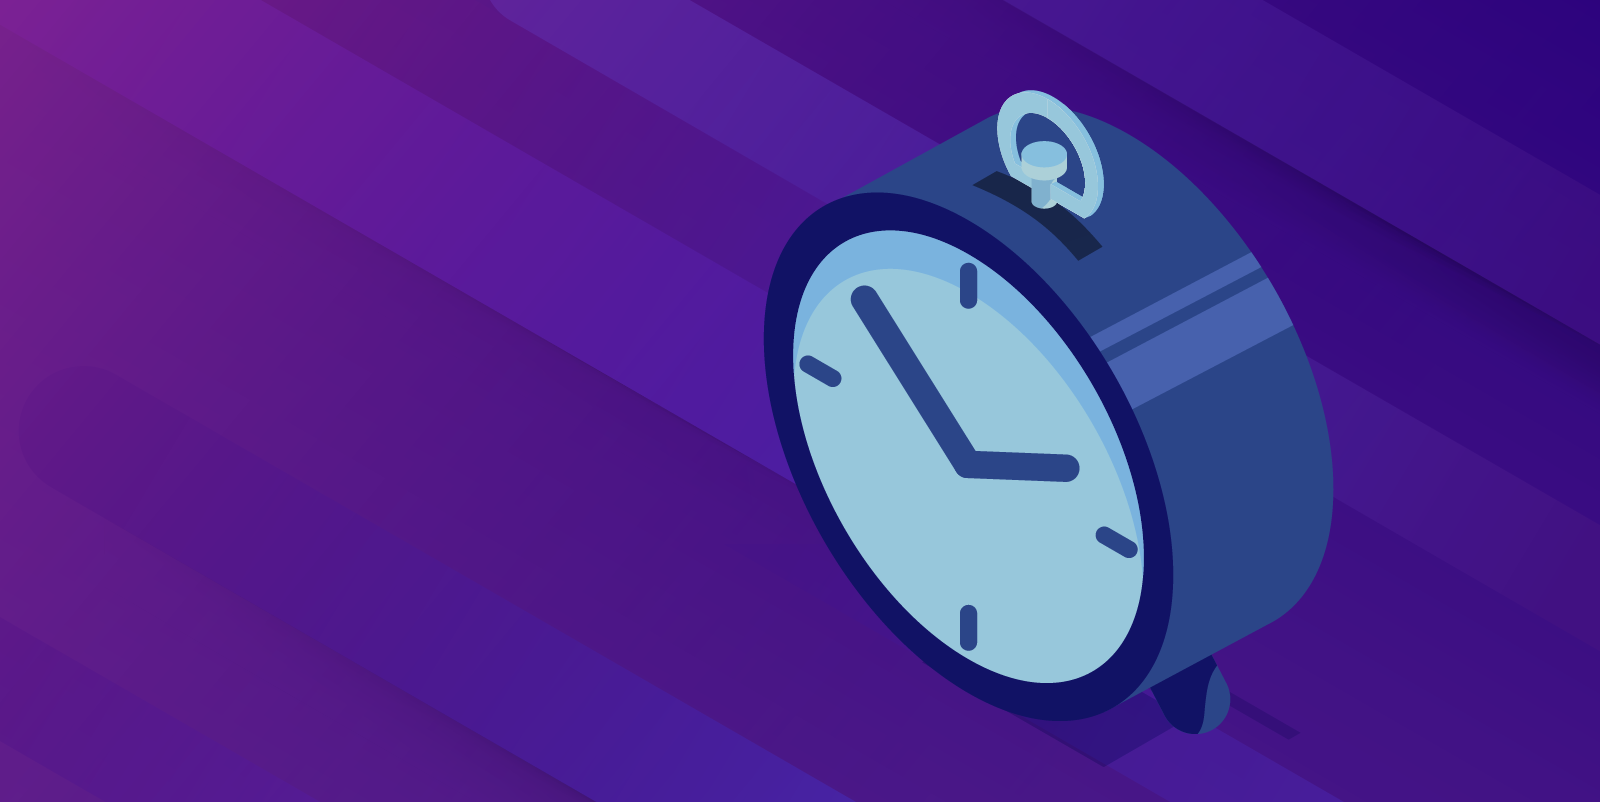 How to Improve Time Management: 10+ Proven Tips